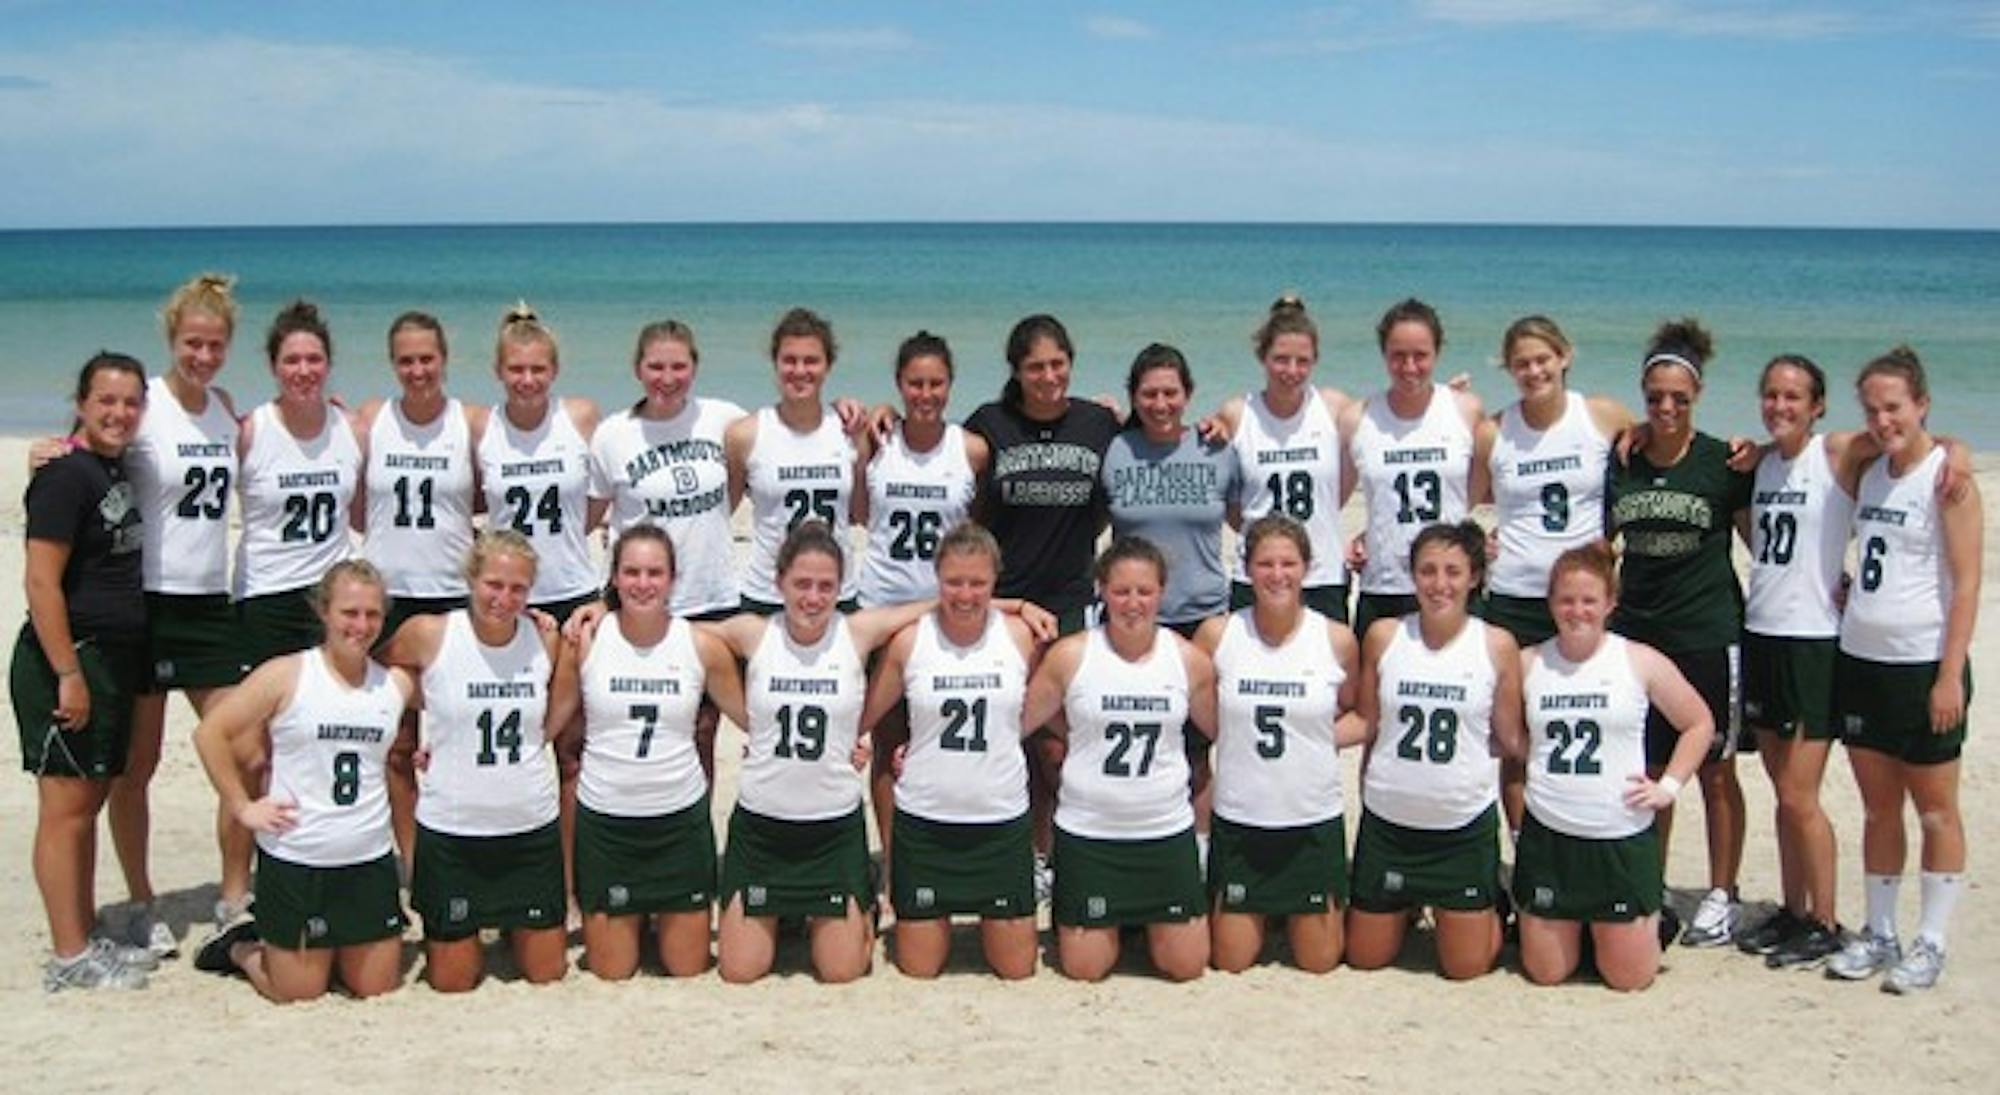 The Big Green women's lacrosse team visits a beach between matches during their winter break trip to Australia.